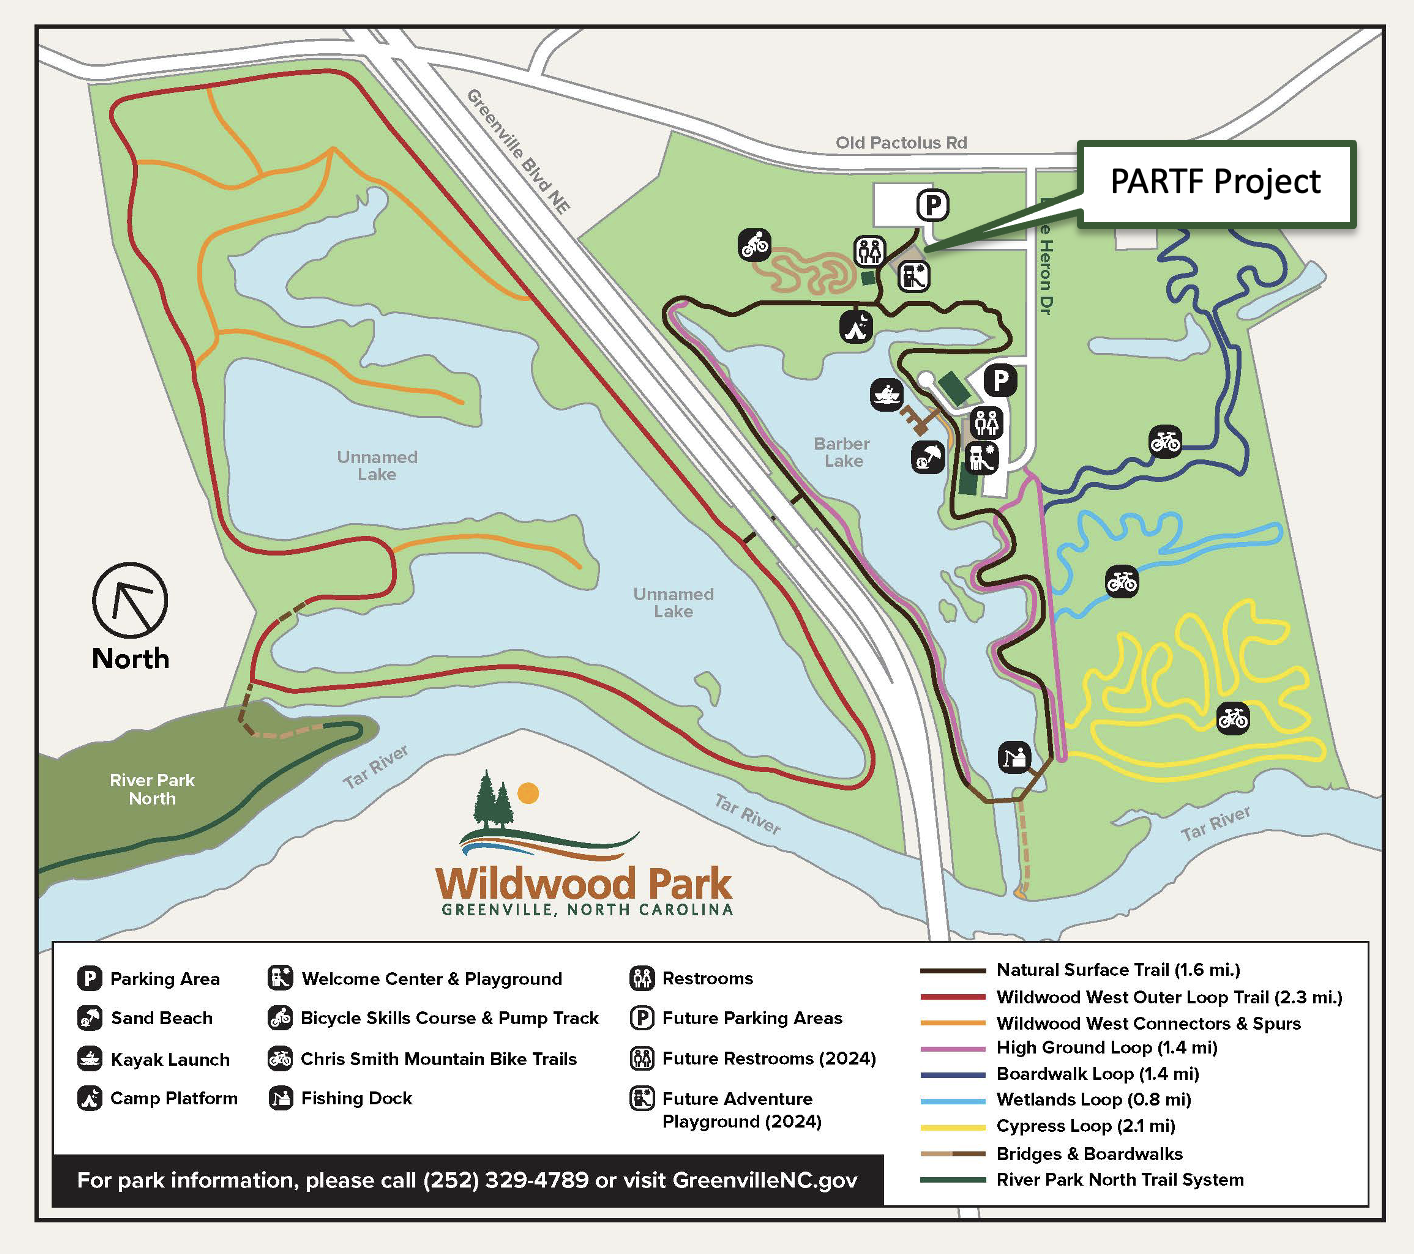 Wildwood Park Map with PARTF